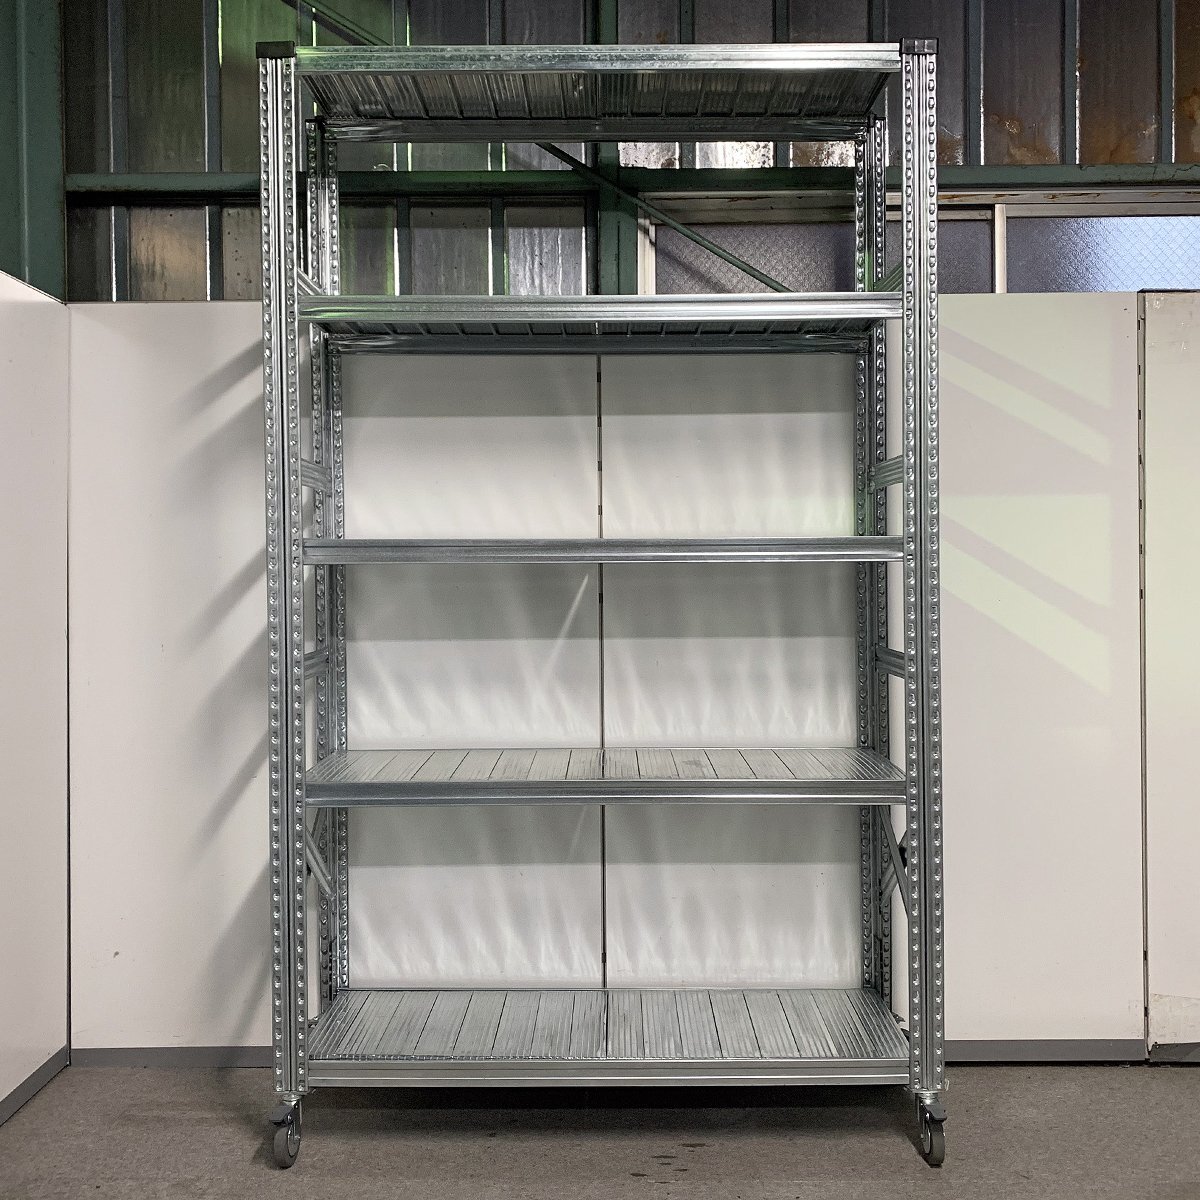 LW16*[METALSISTEM]5 step steel shelf W1280×D410×H2100mm with casters ./ Italy made metal system SUPER123 light weight rack 